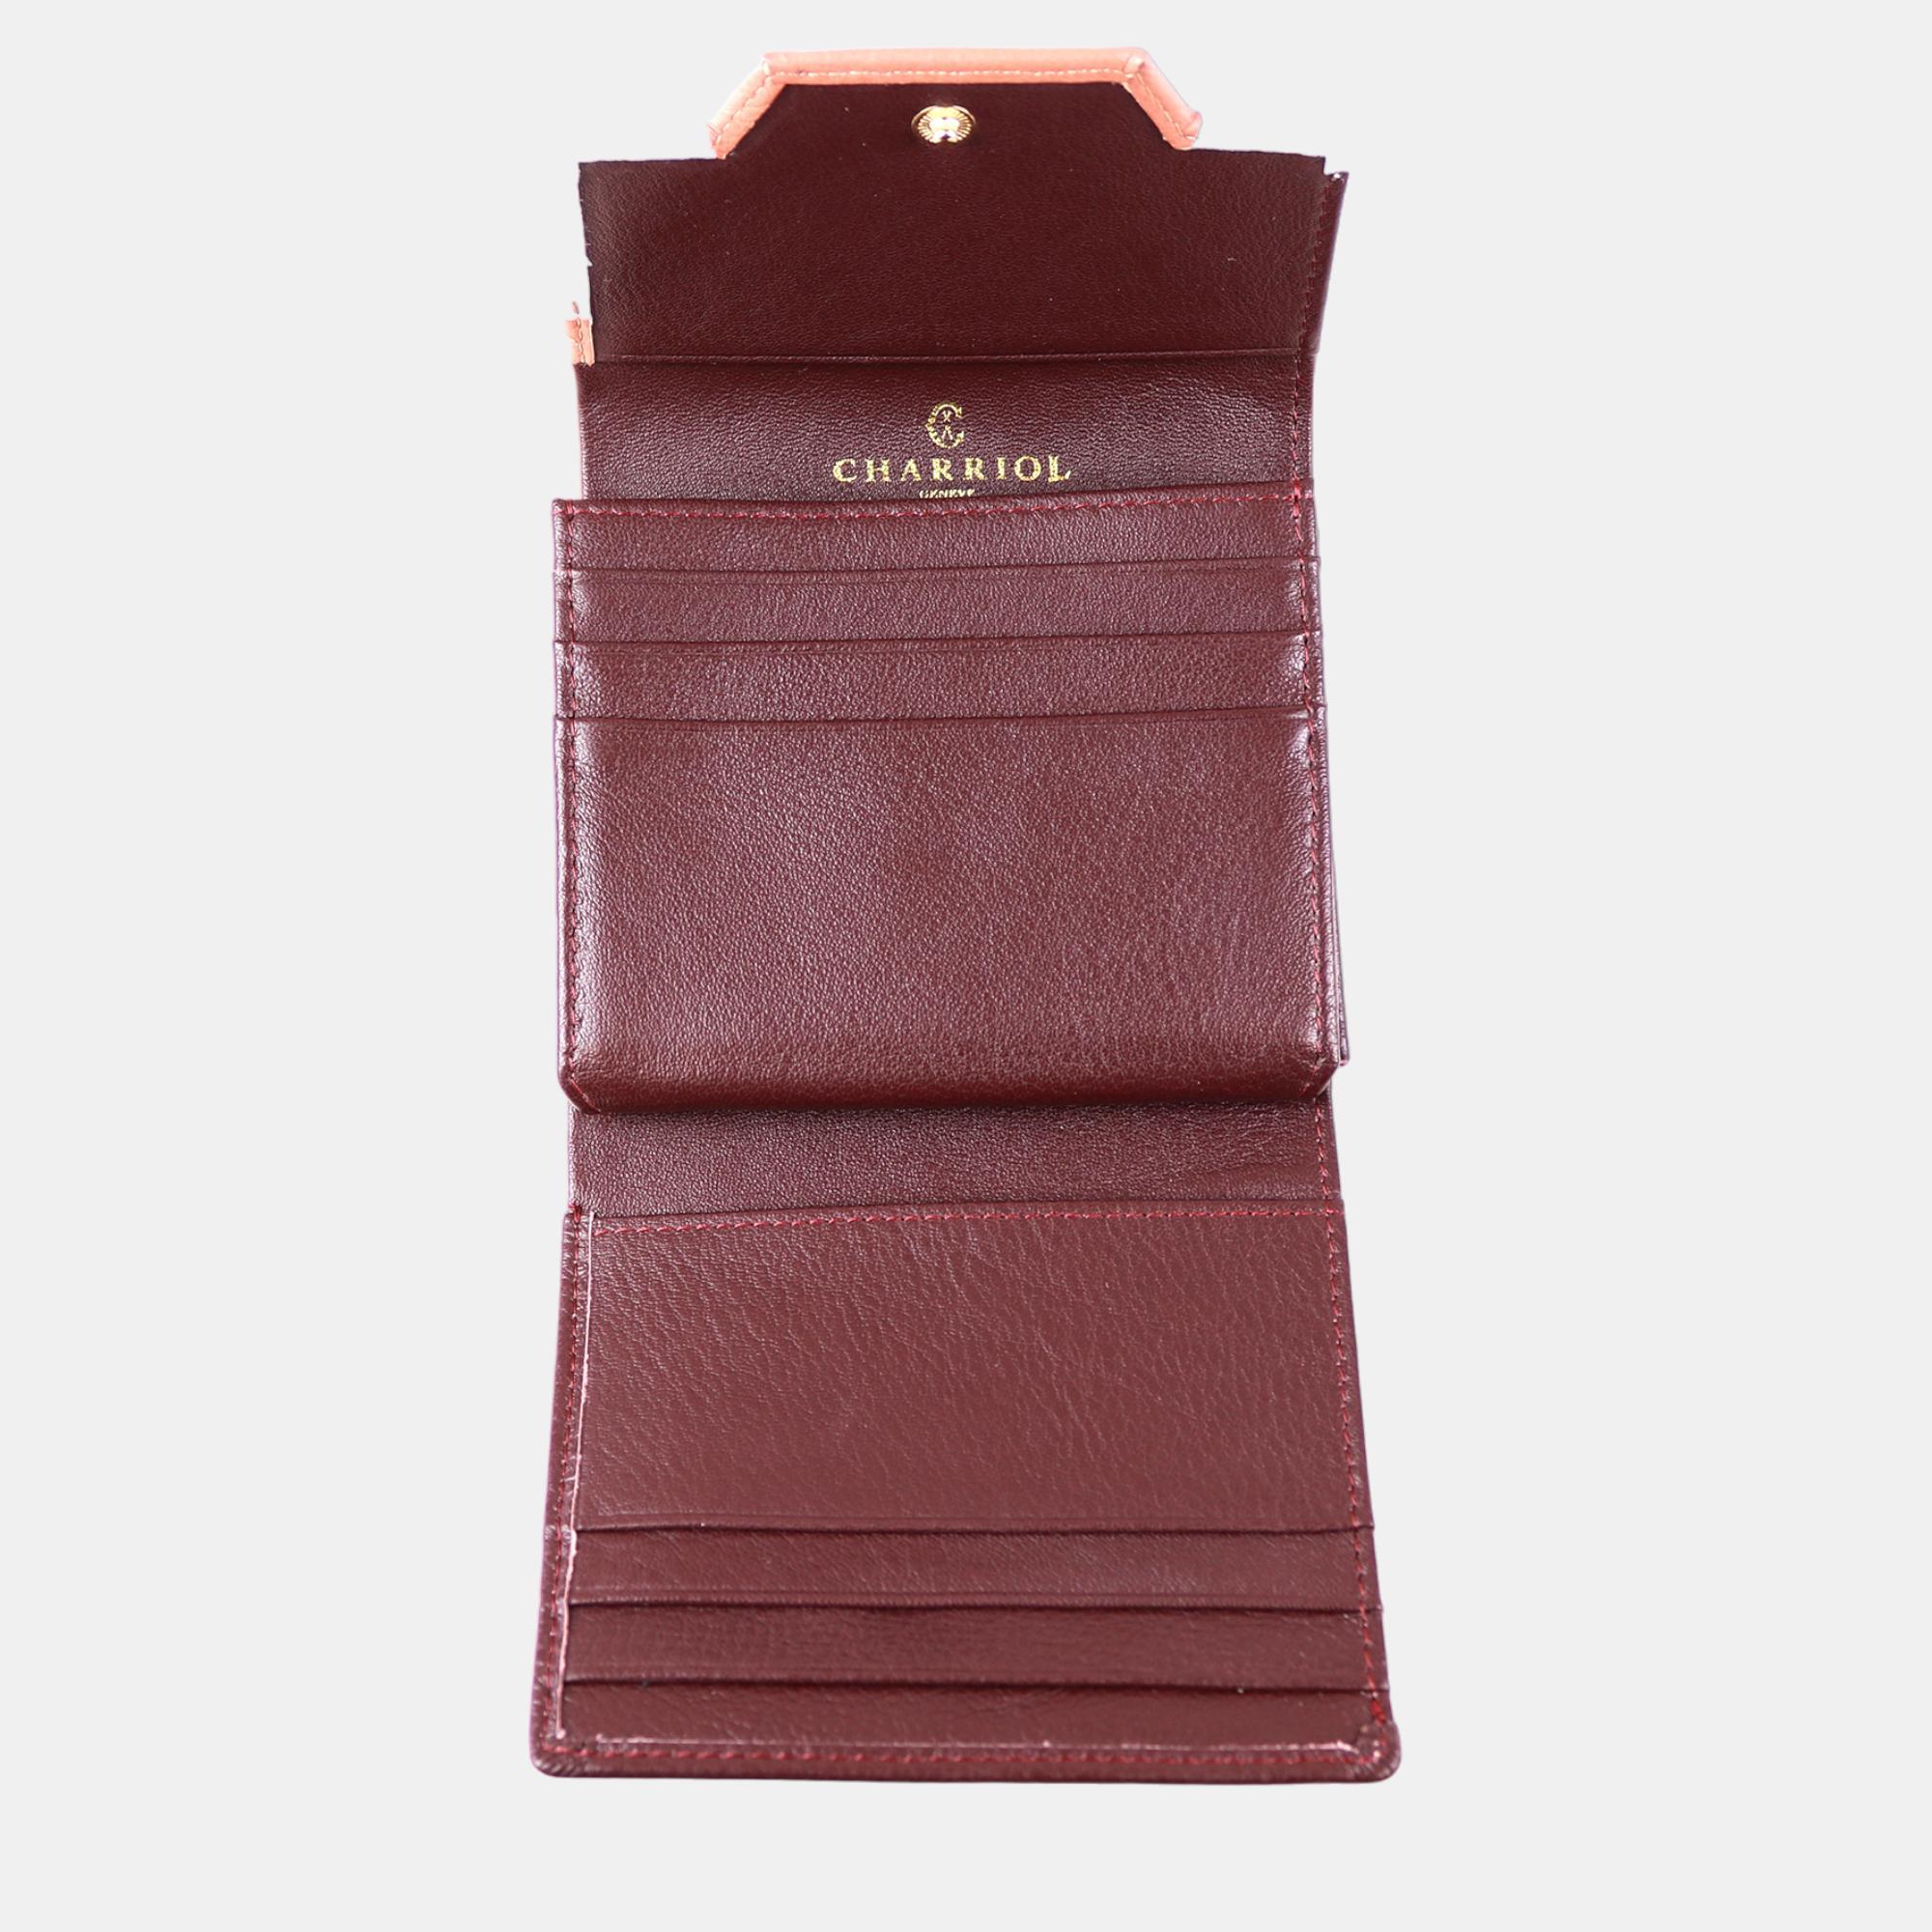 Charriol Wine/Cream Leather Forever Wallet